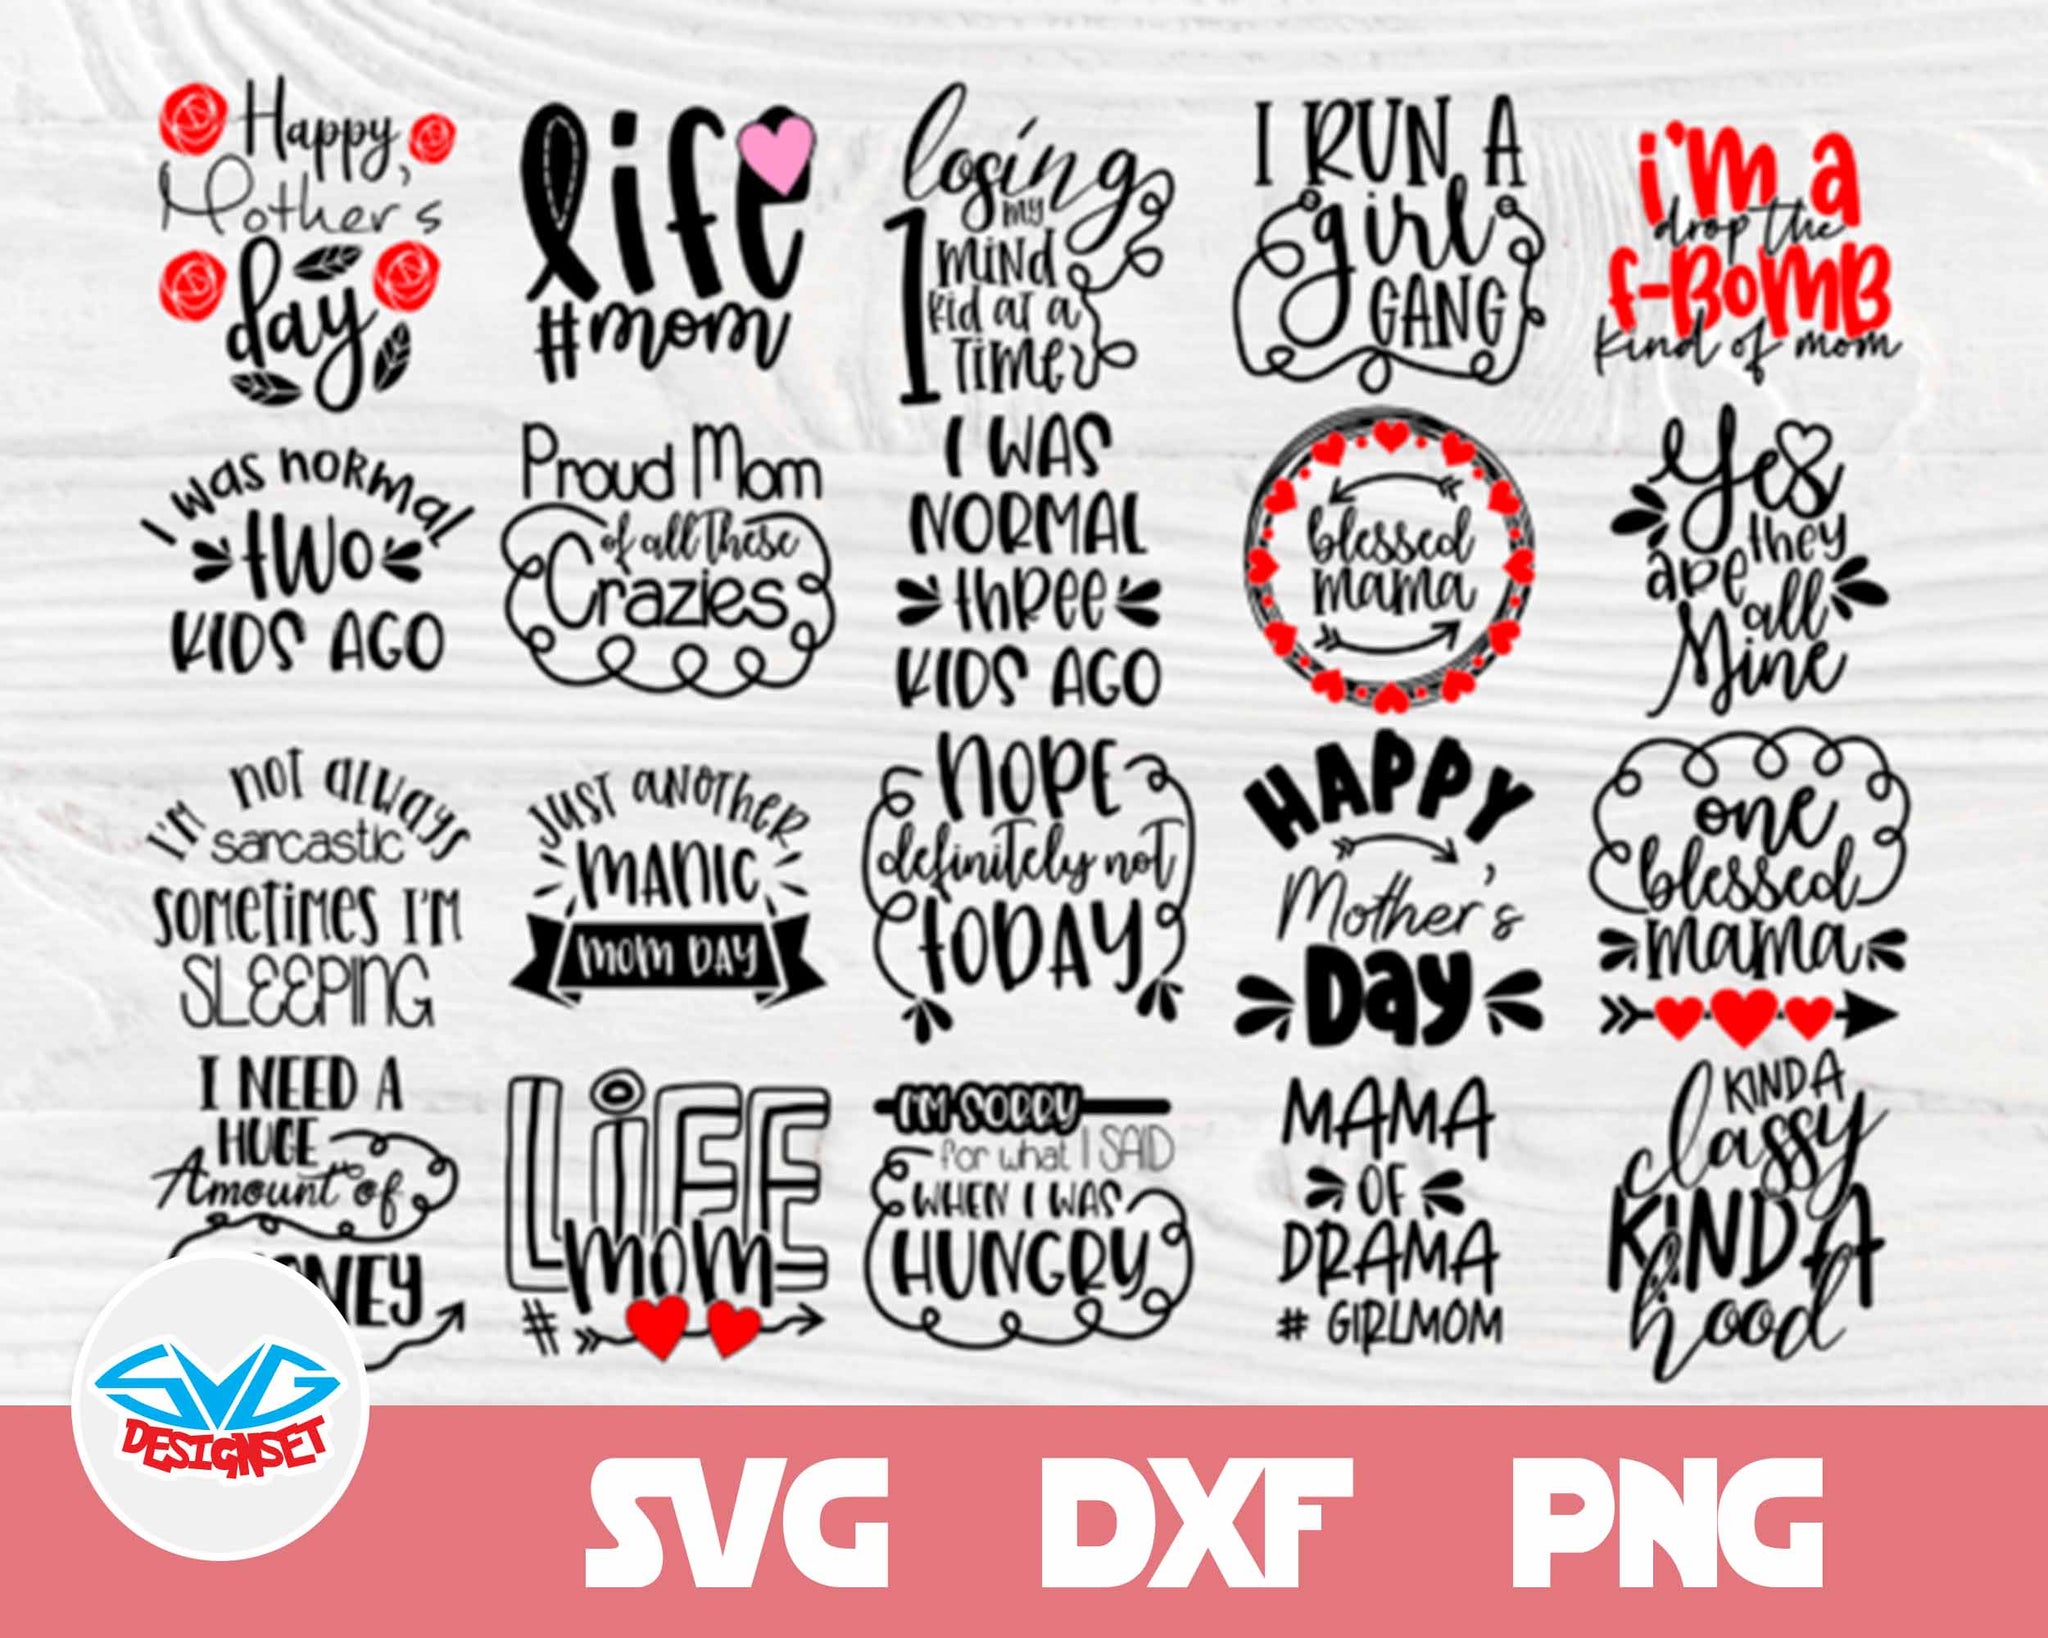 Mother's Day Svg, Dxf, Eps, Png, Clipart, Silhouette and Cutfiles #2 - SVGDesignSets